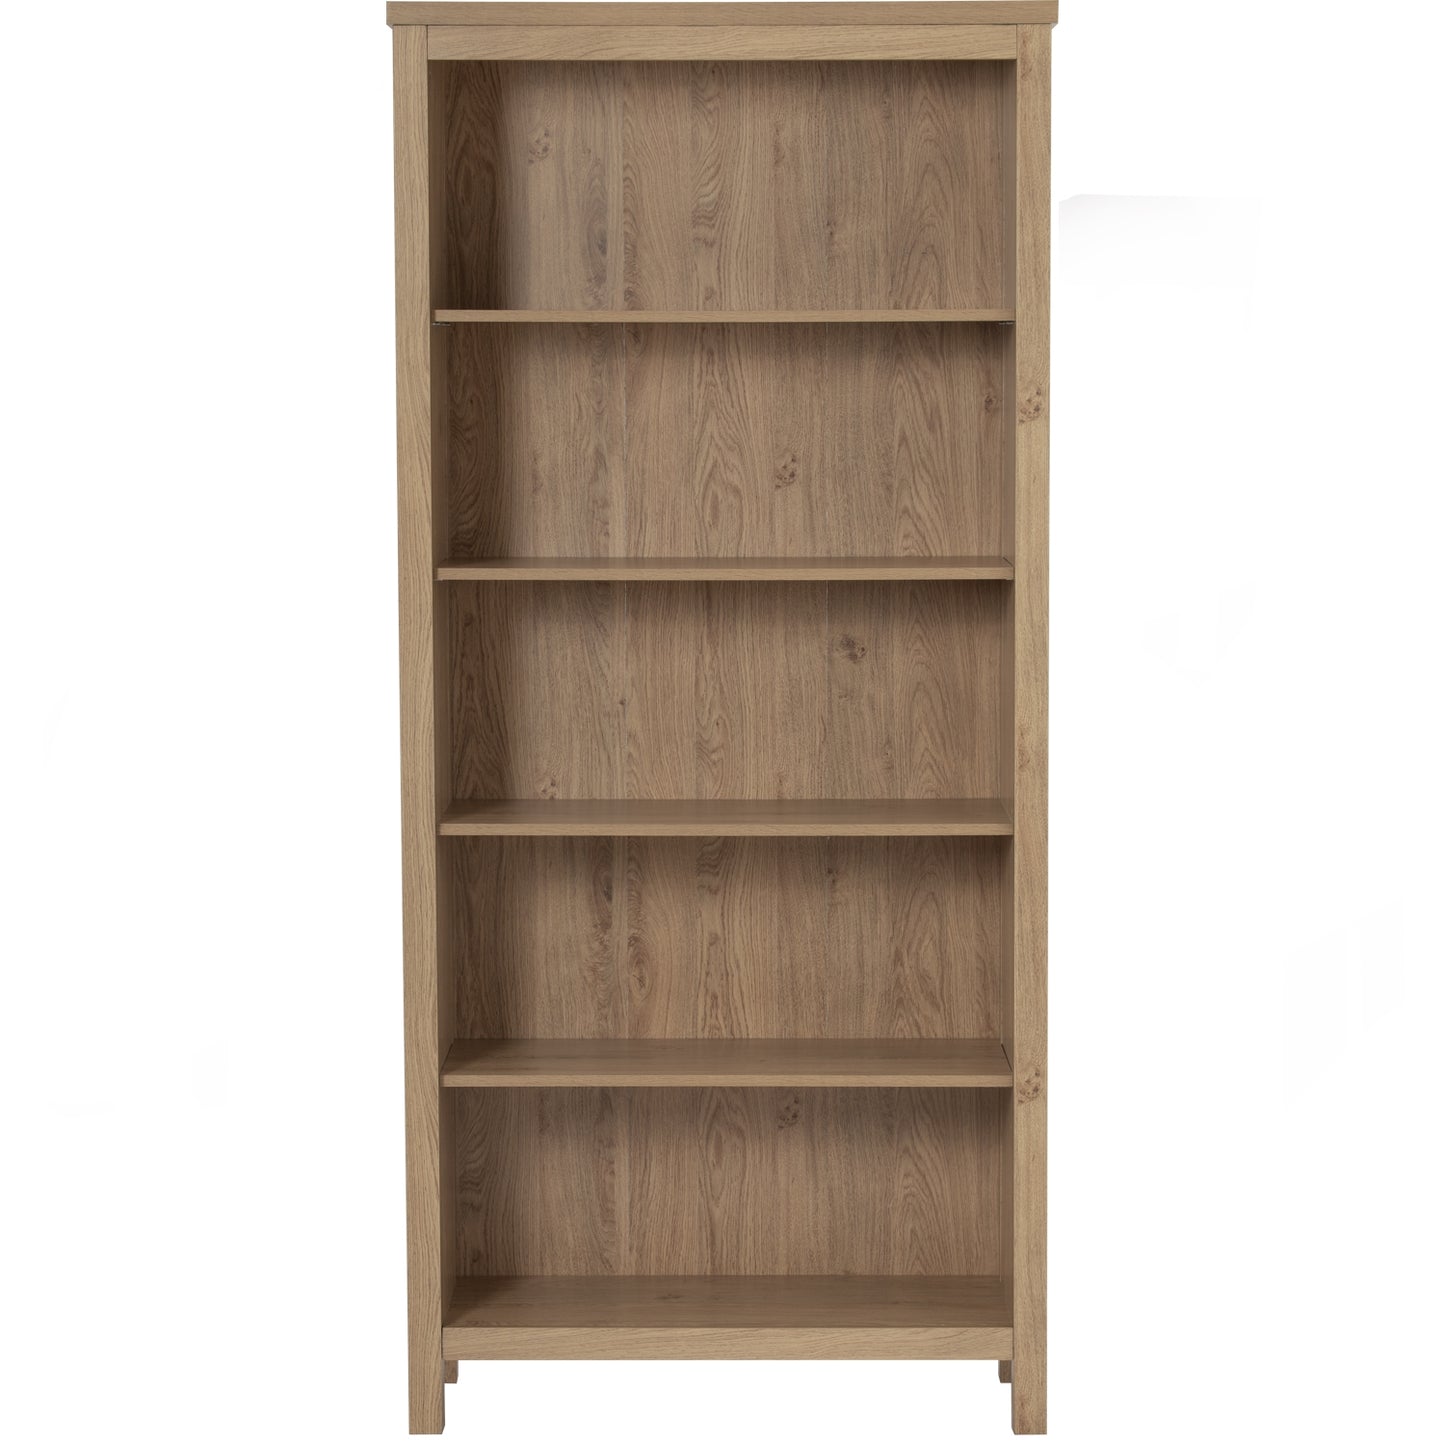 Lucas Bookcase in Natural